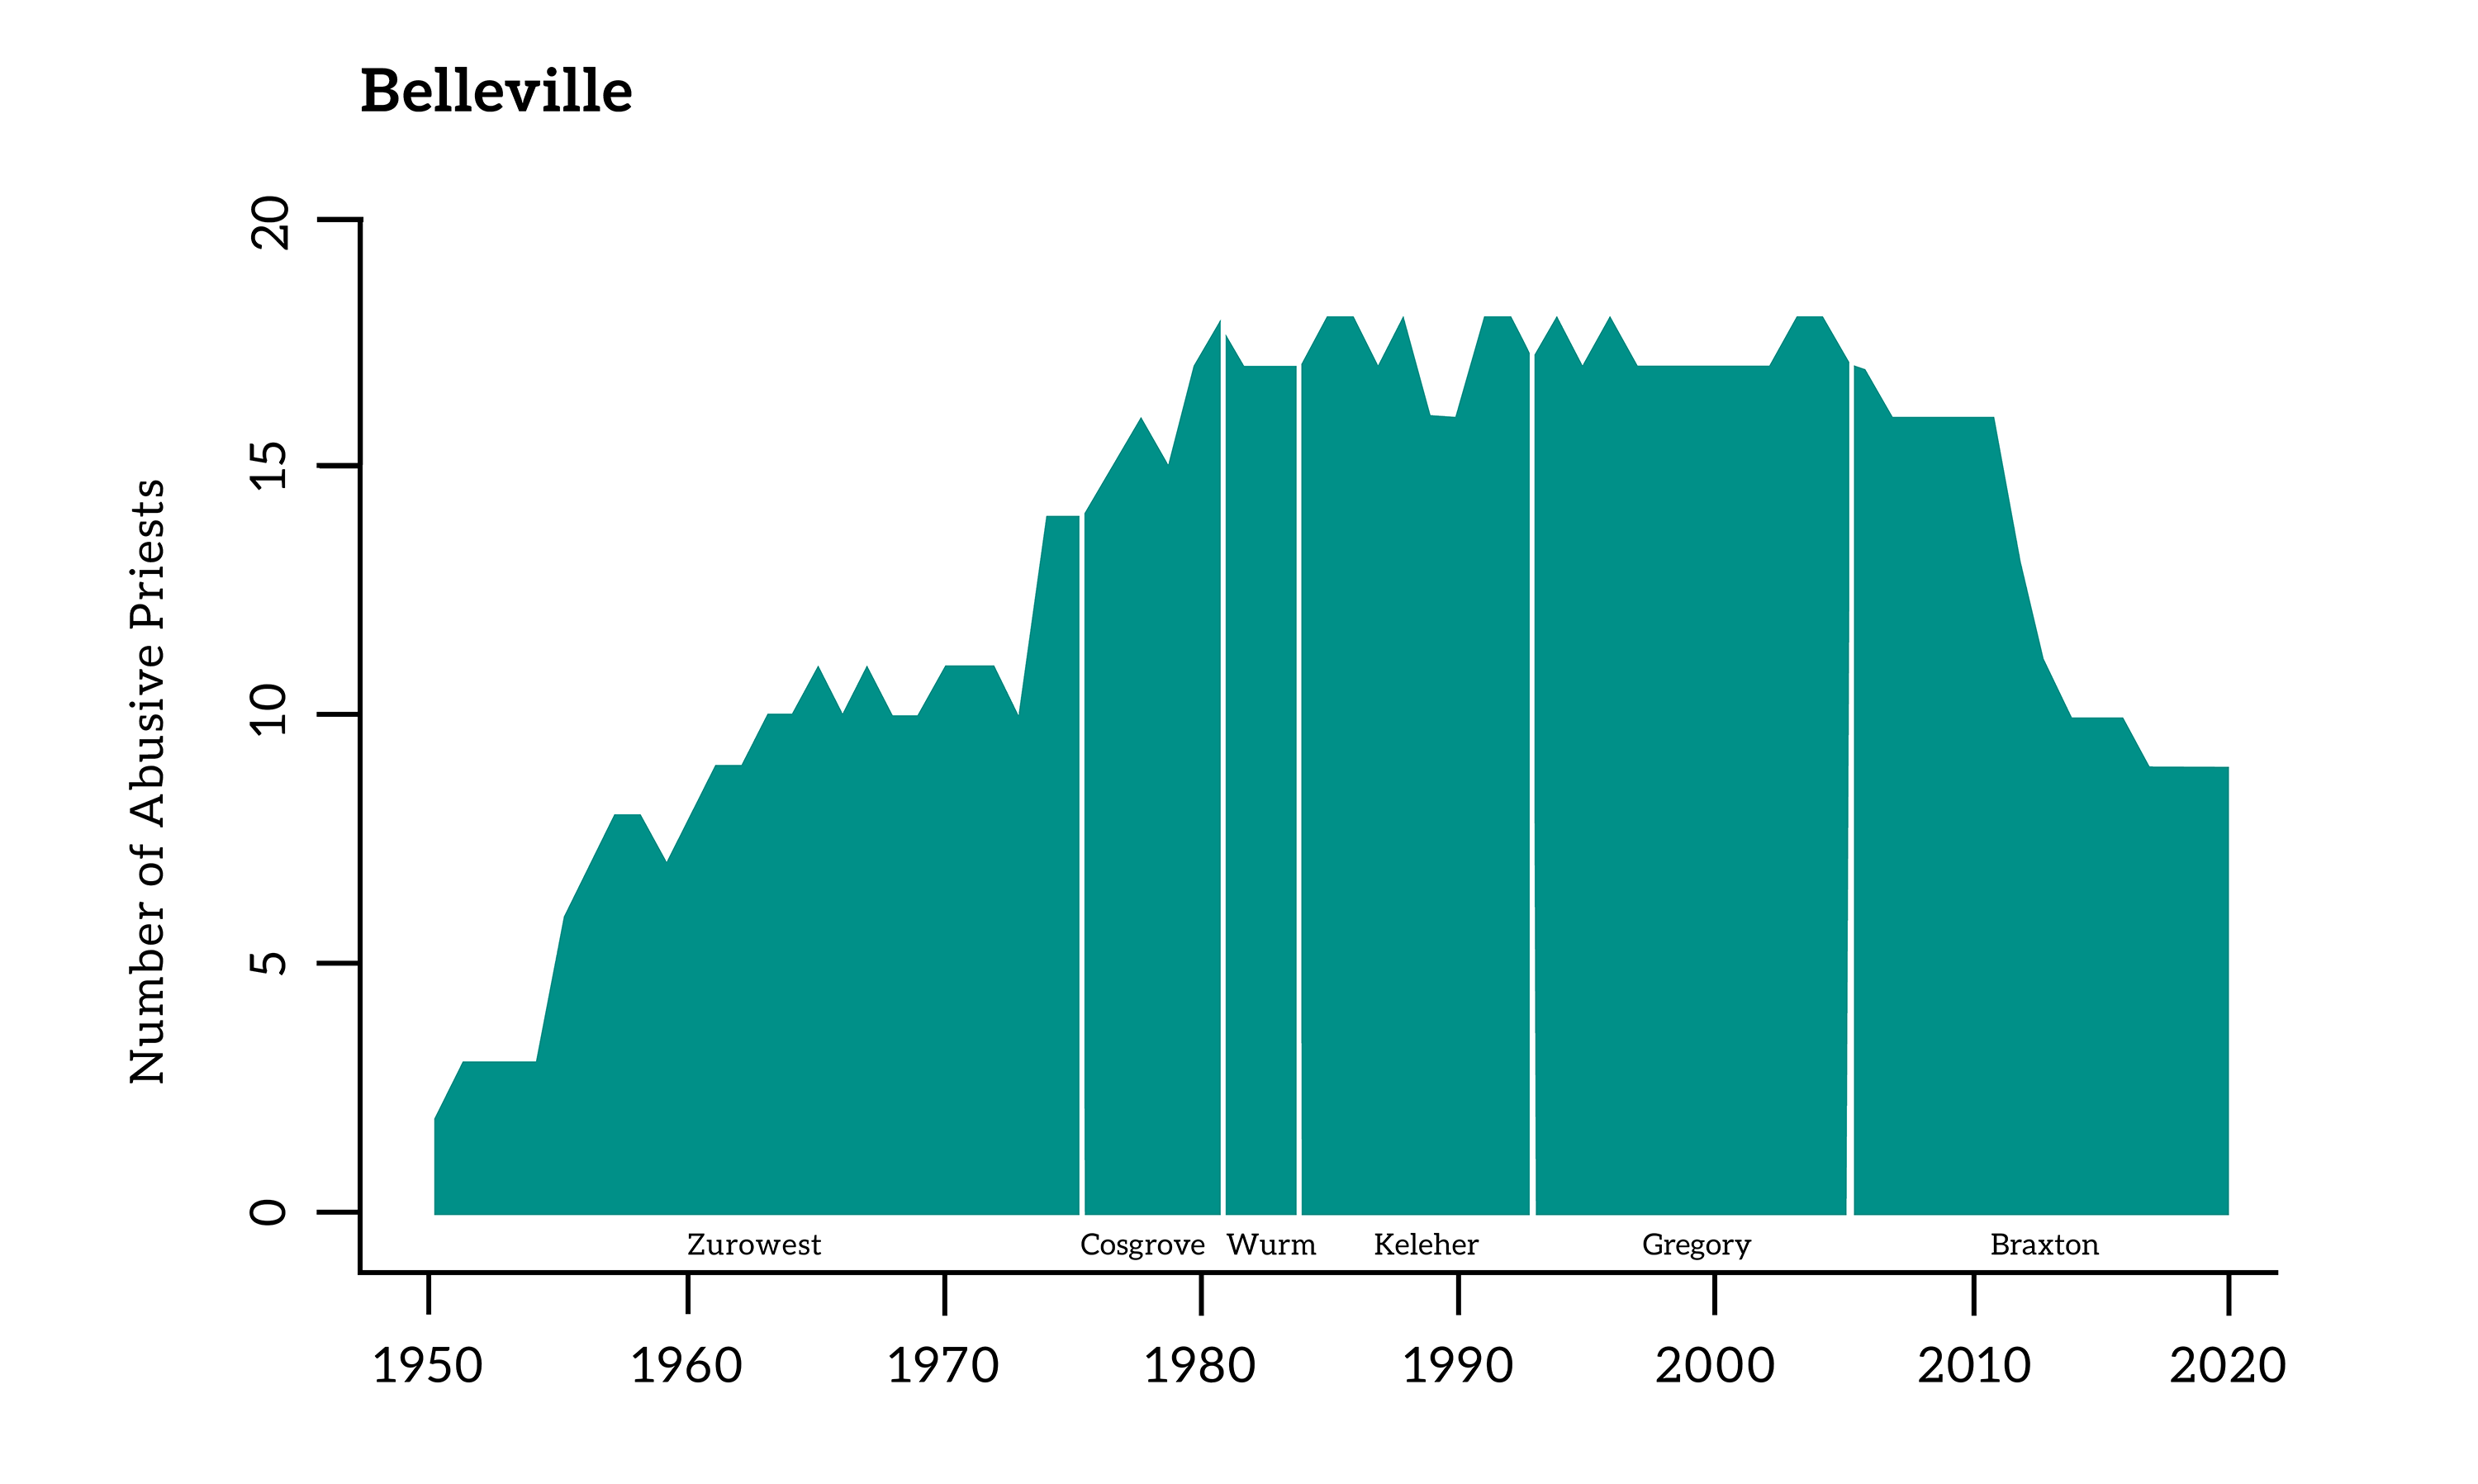 graph showing number of abusive priests in Belleville